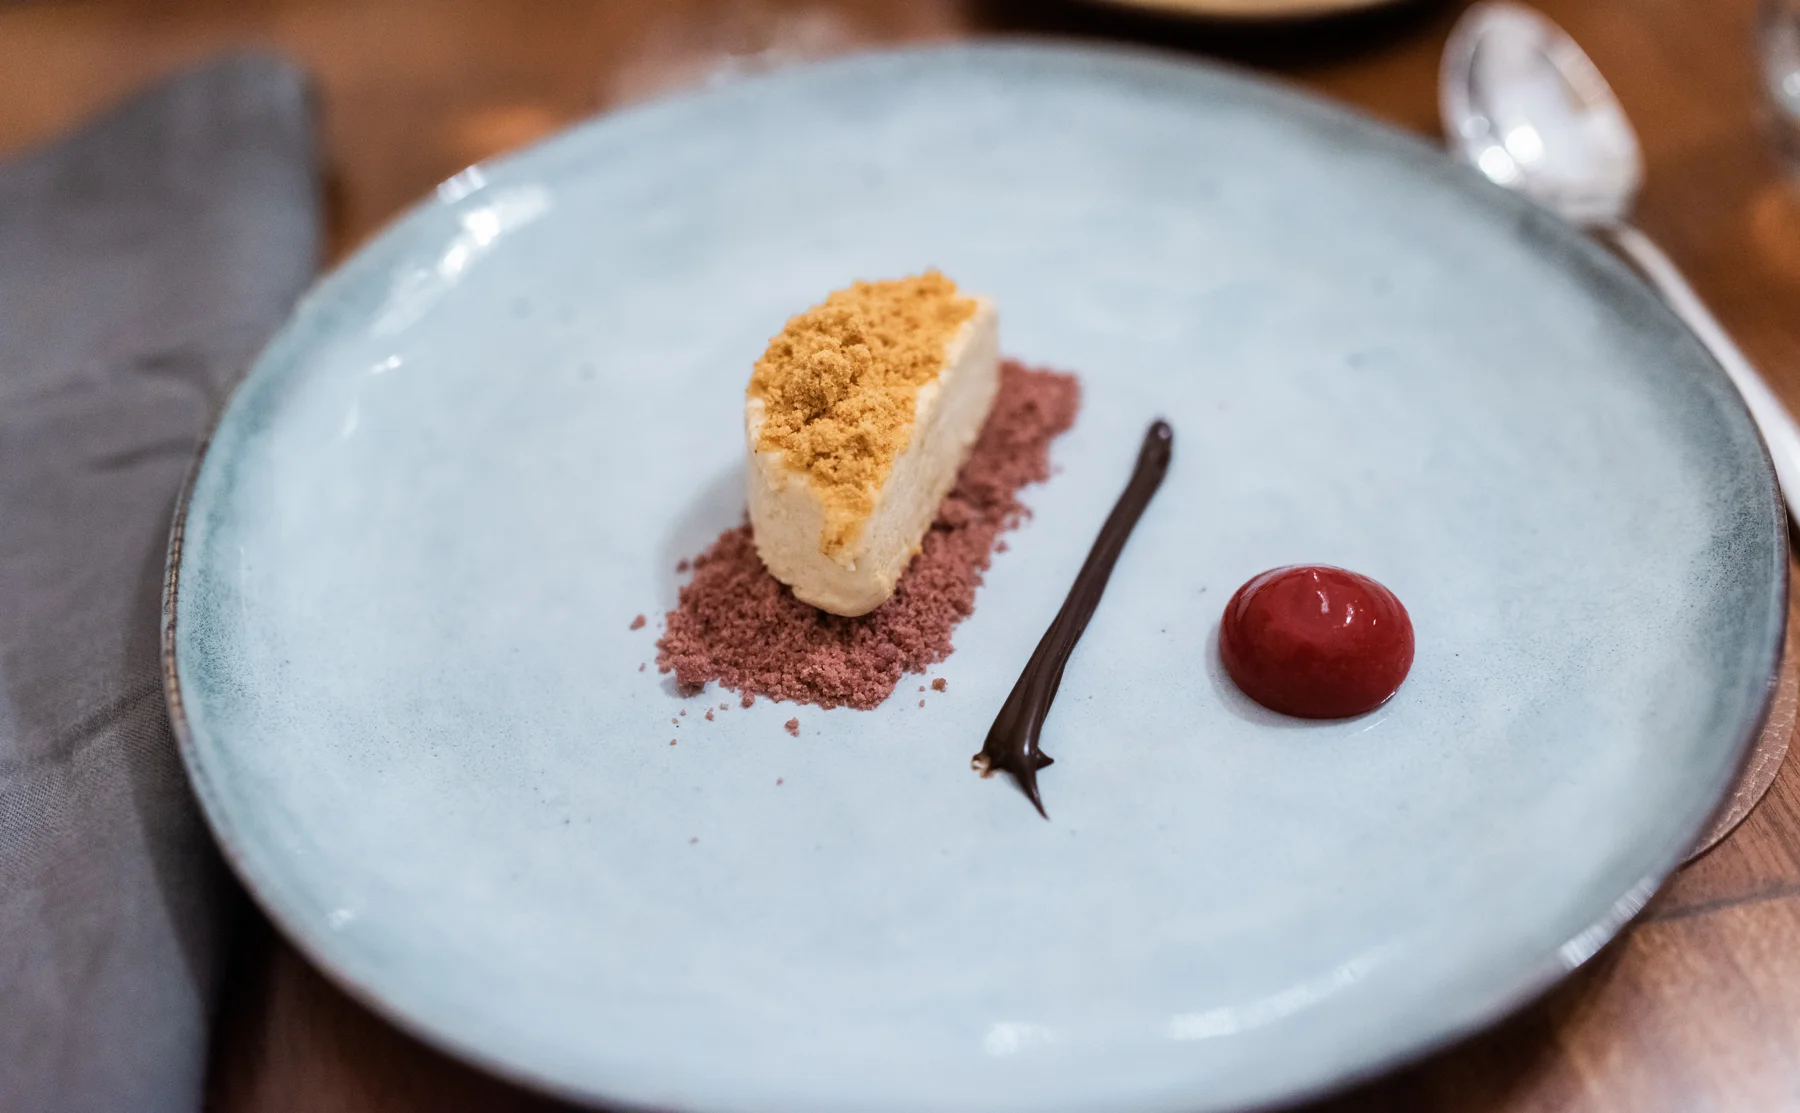 7 Course Tasting Menu at Eleven98's Chef's Table - Hackney - 1522040